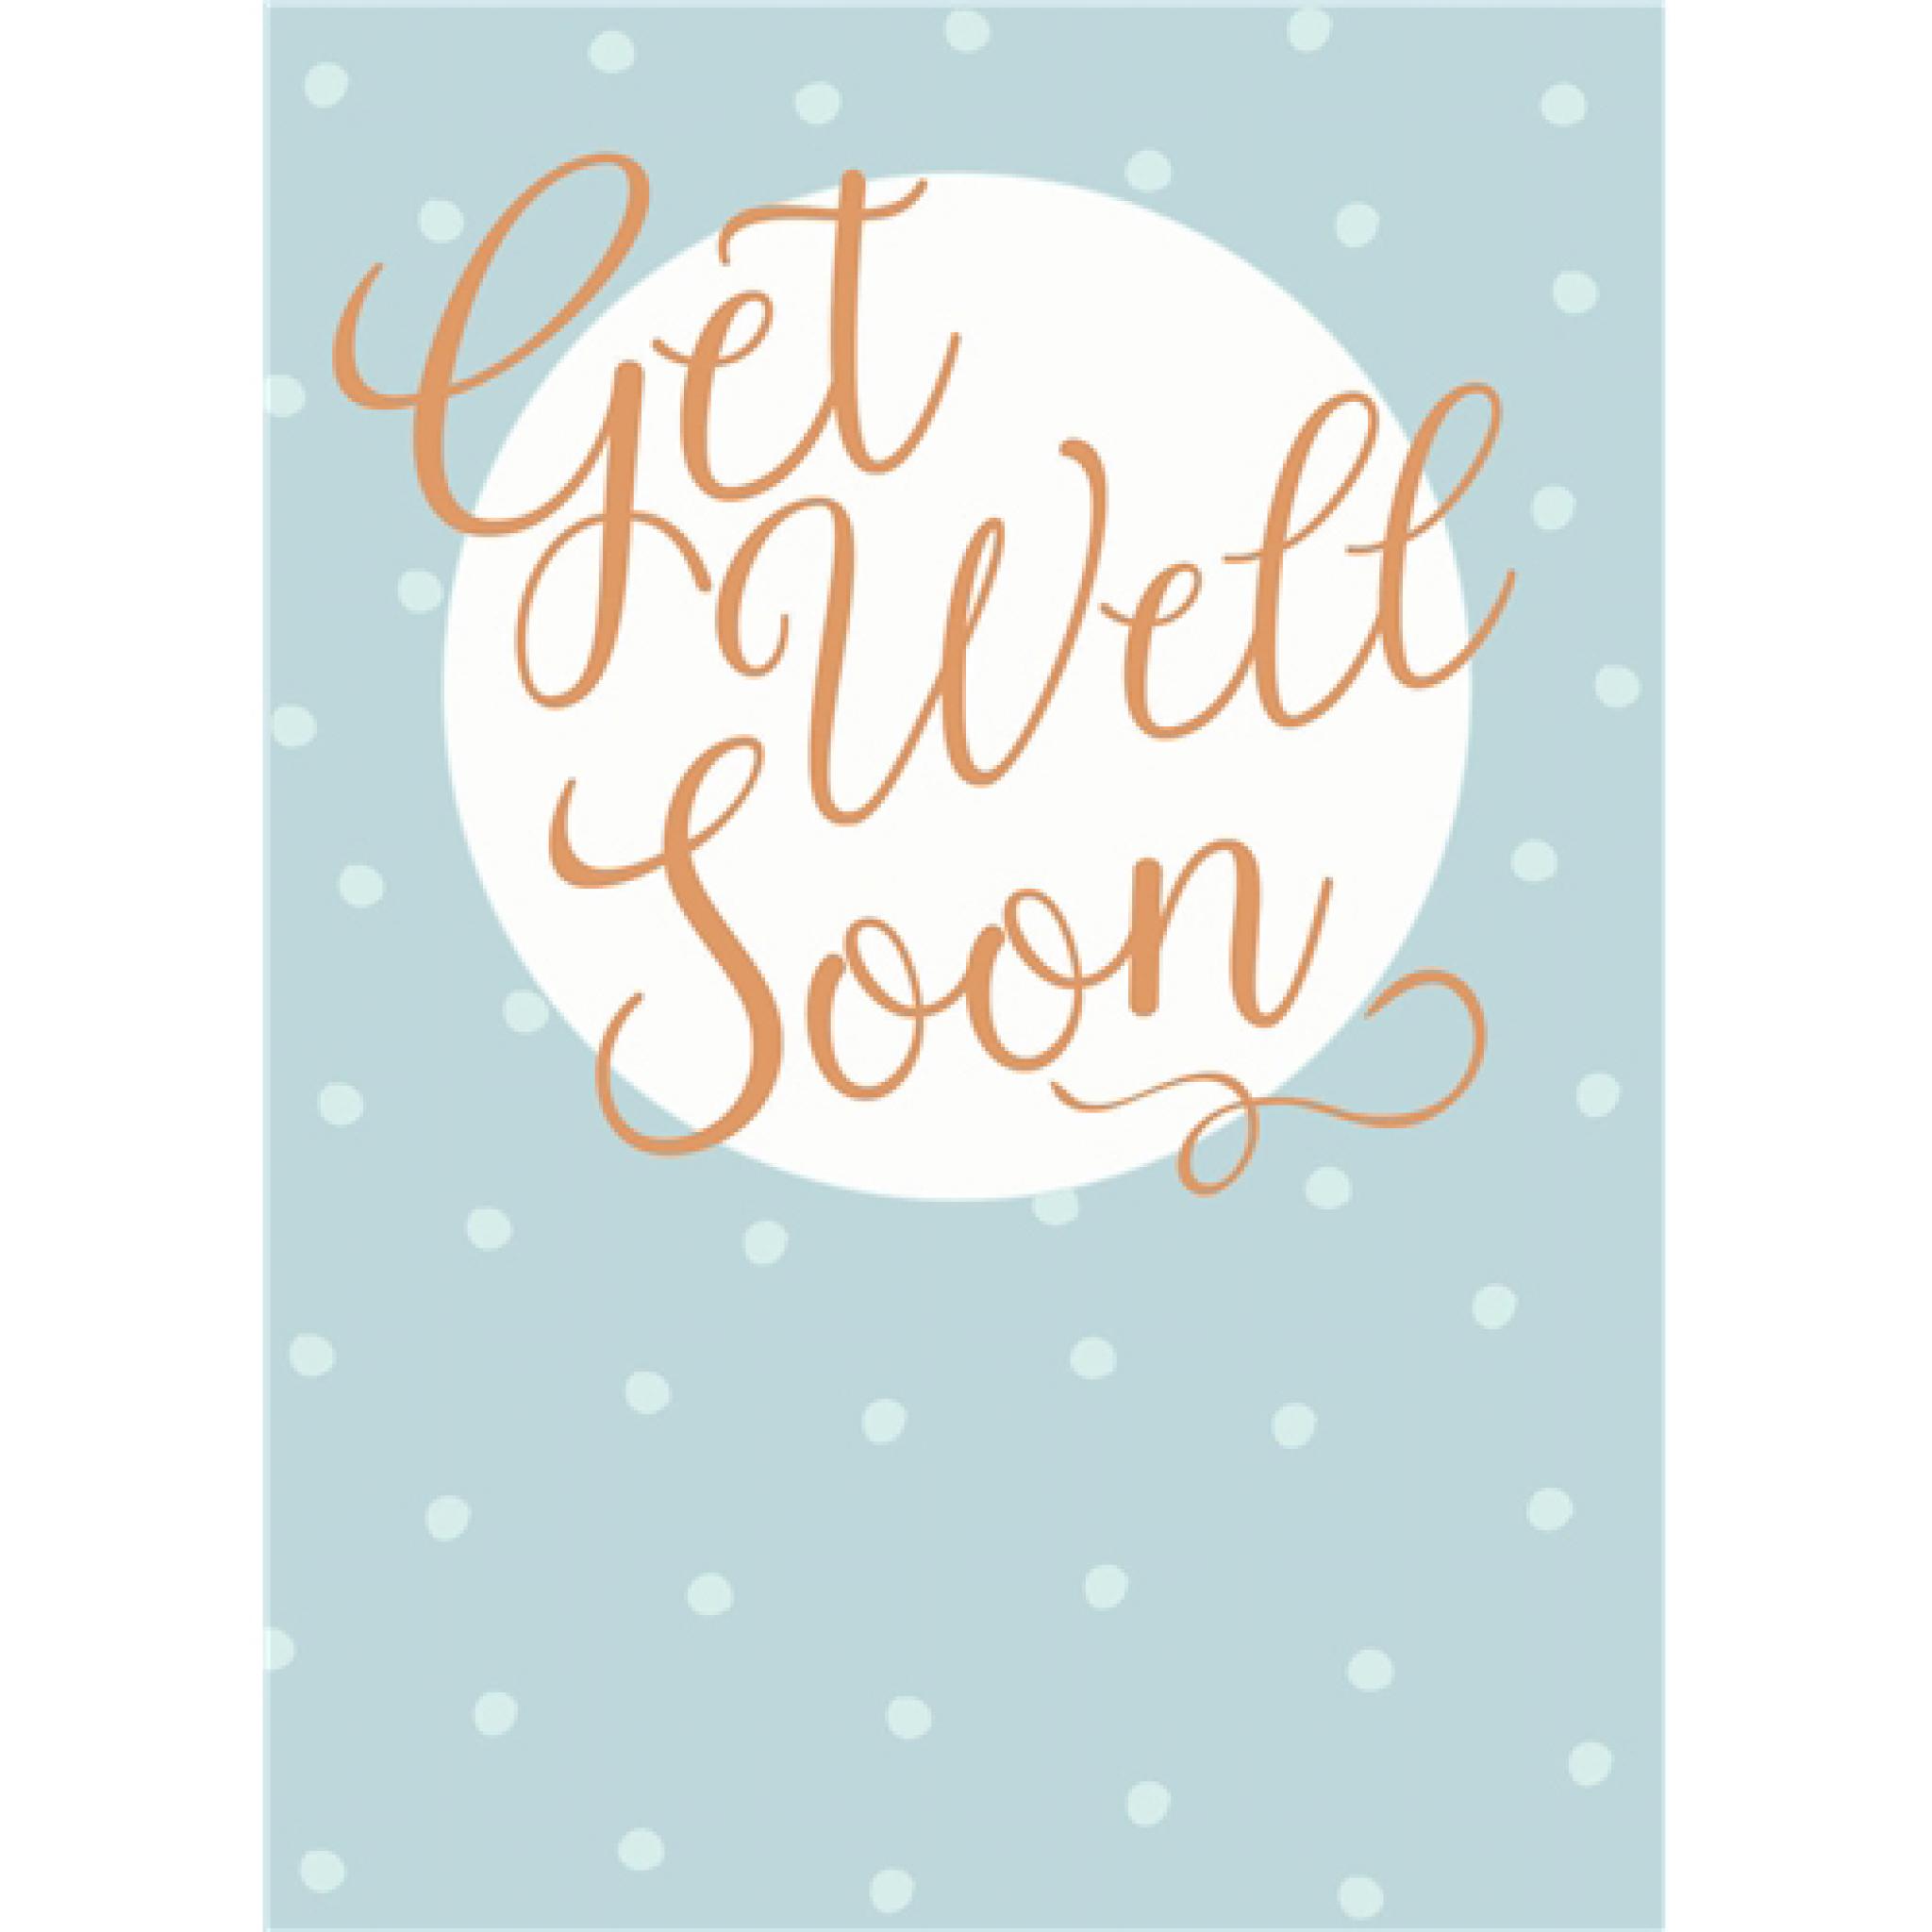 Get Well Soon Card Template Free Download